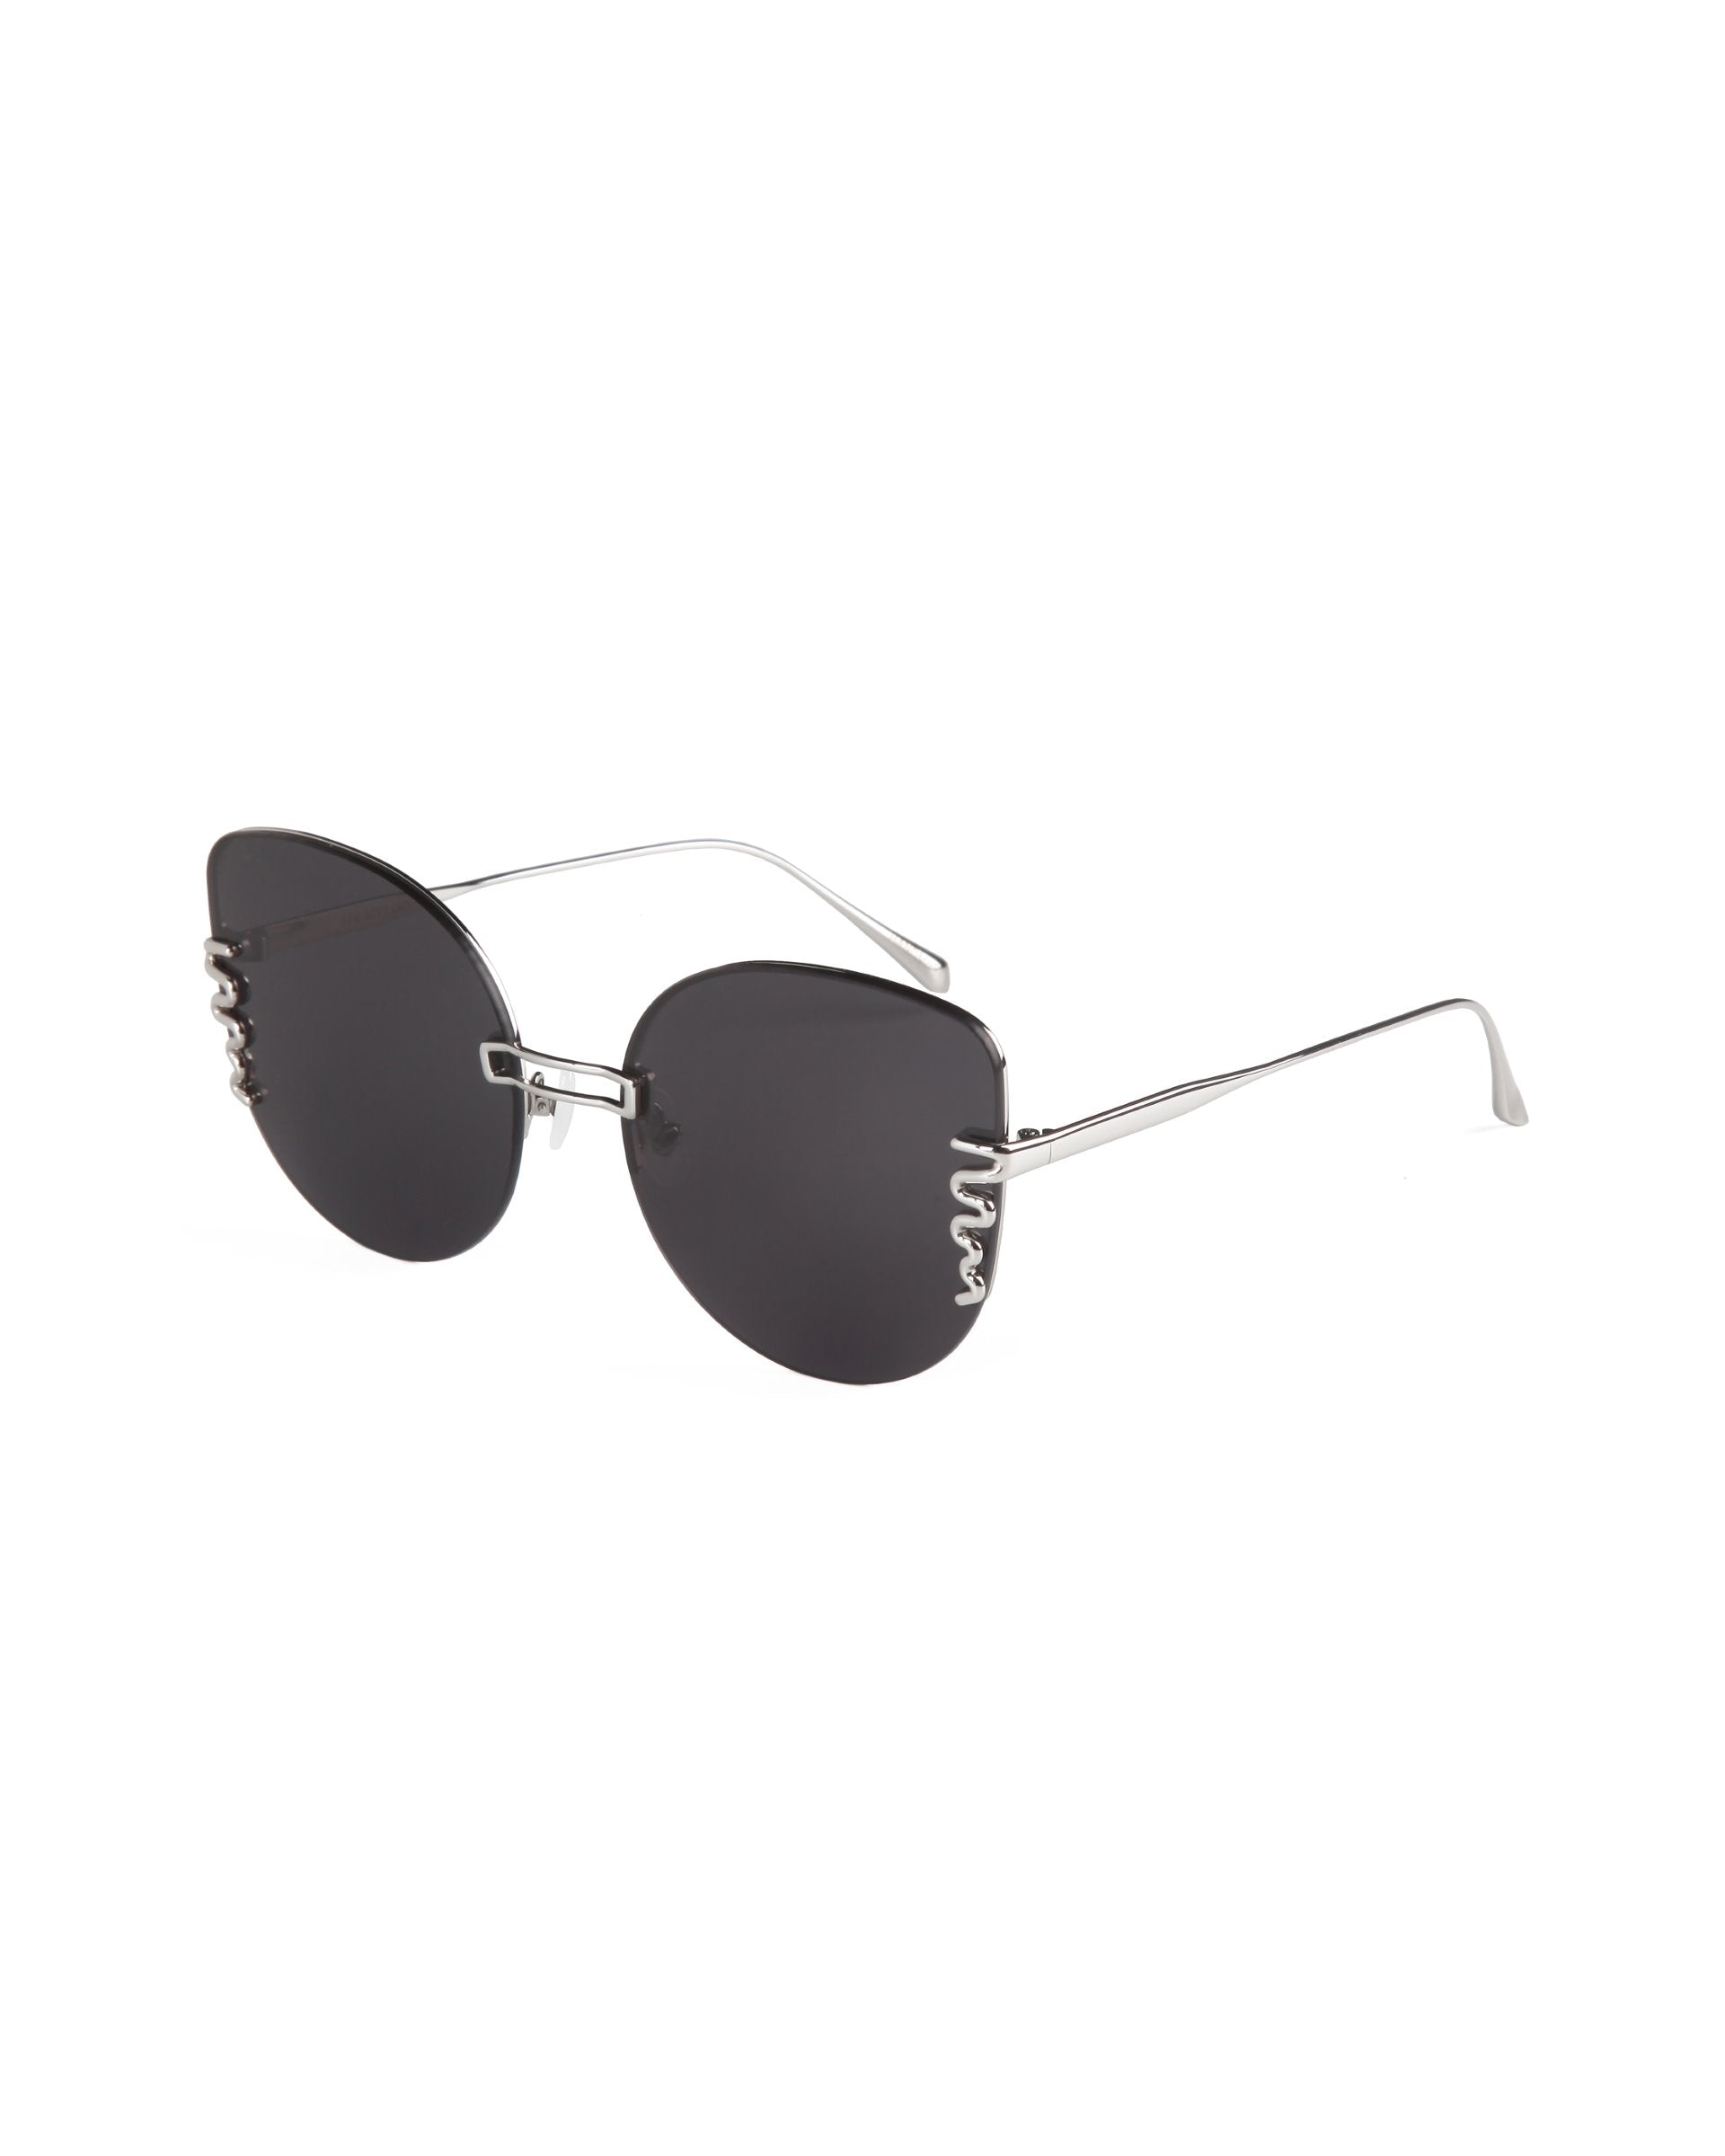 A pair of For Art's Sake® Girlboss sunglasses with round, dark-tinted lenses and thin, silver metal frames featuring a unique wavy design near the hinges. The slender arms extend straight back, and the adjustable nosepads ensure comfort, all while providing 100% UV protection.